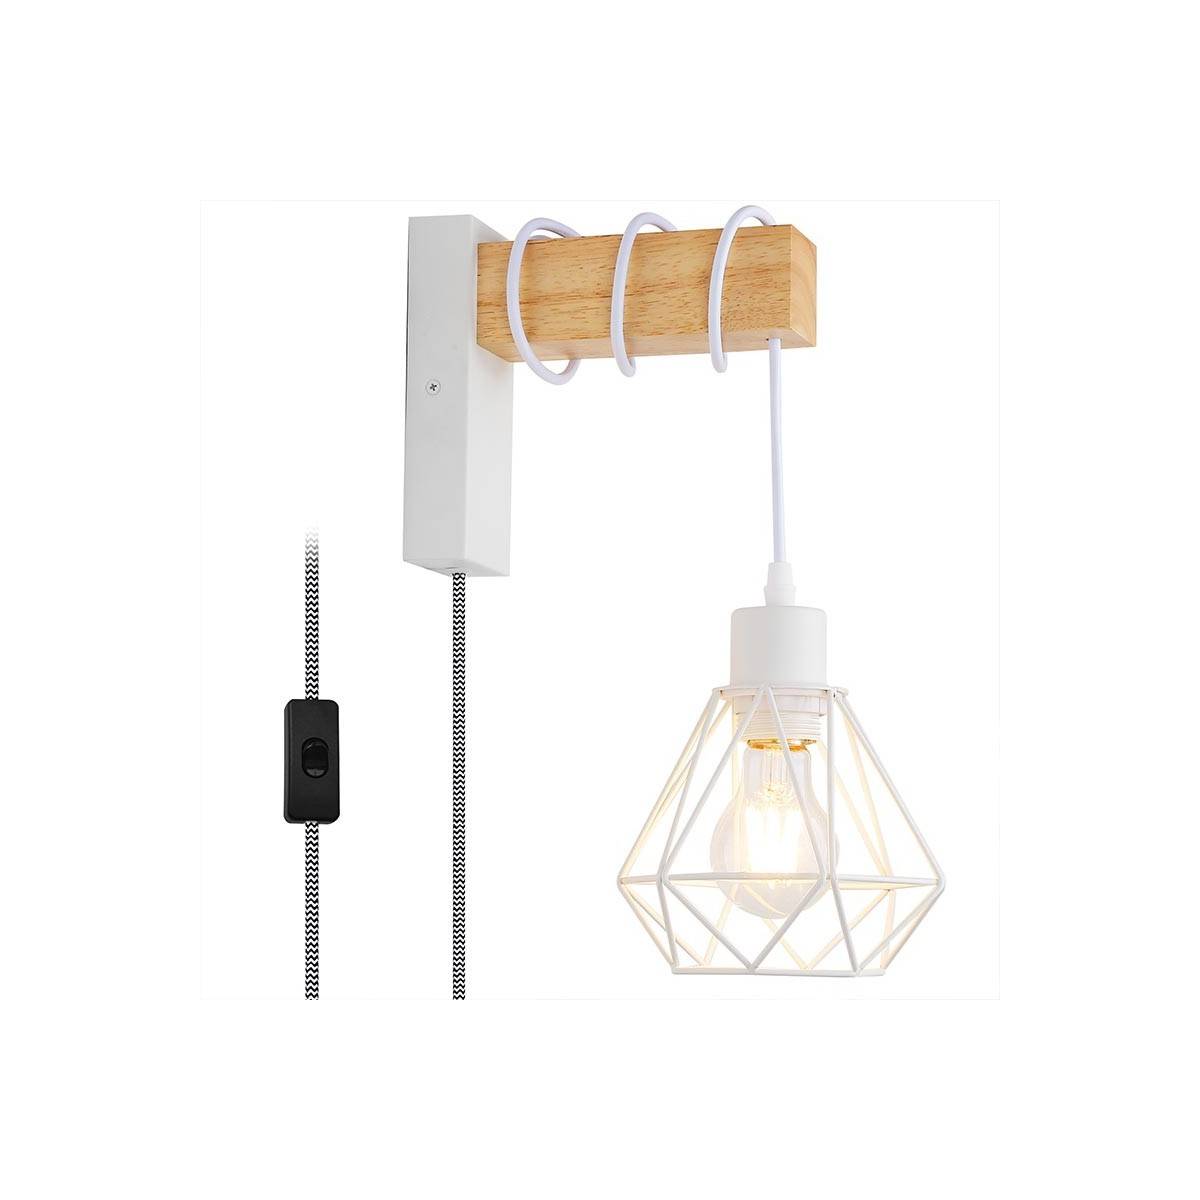 Cage wall light with switch and plug "RODEN".